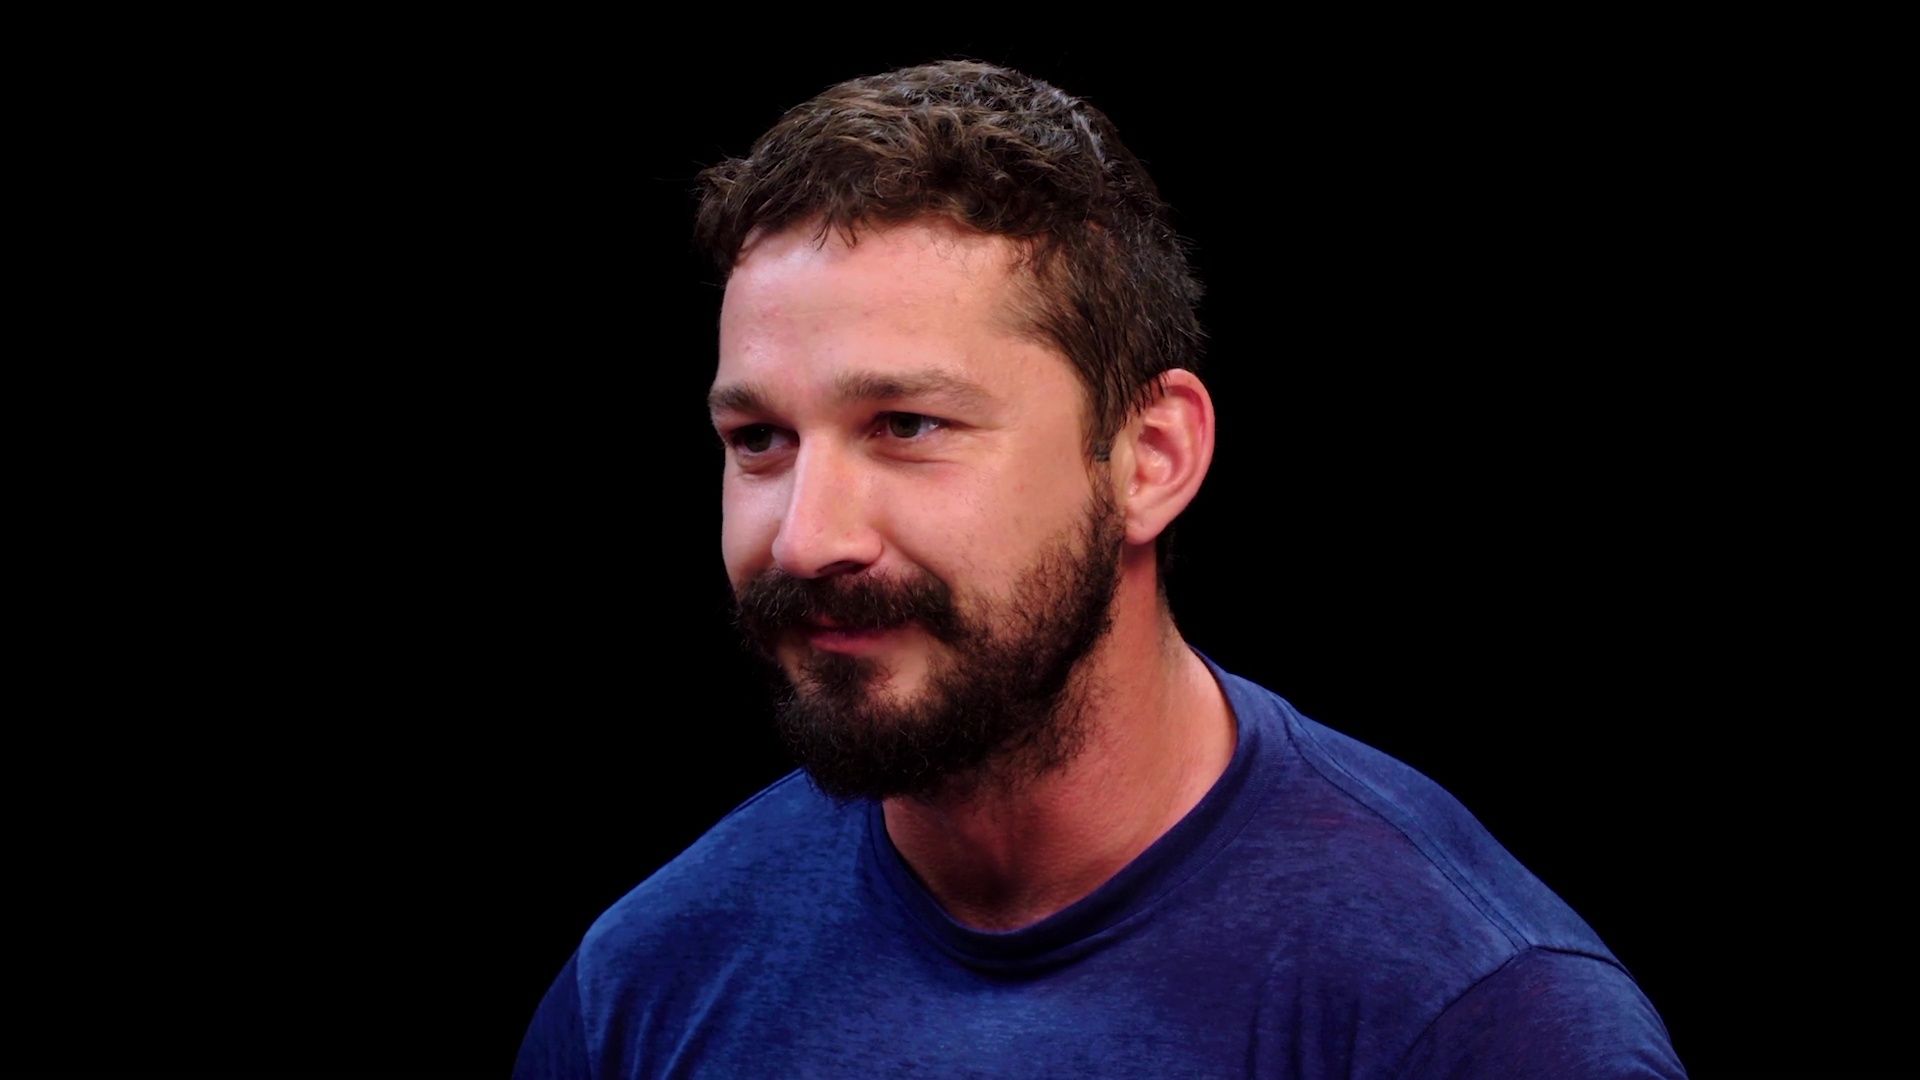 Shia LaBeouf Sheds a Tear While Eating Spicy Wings